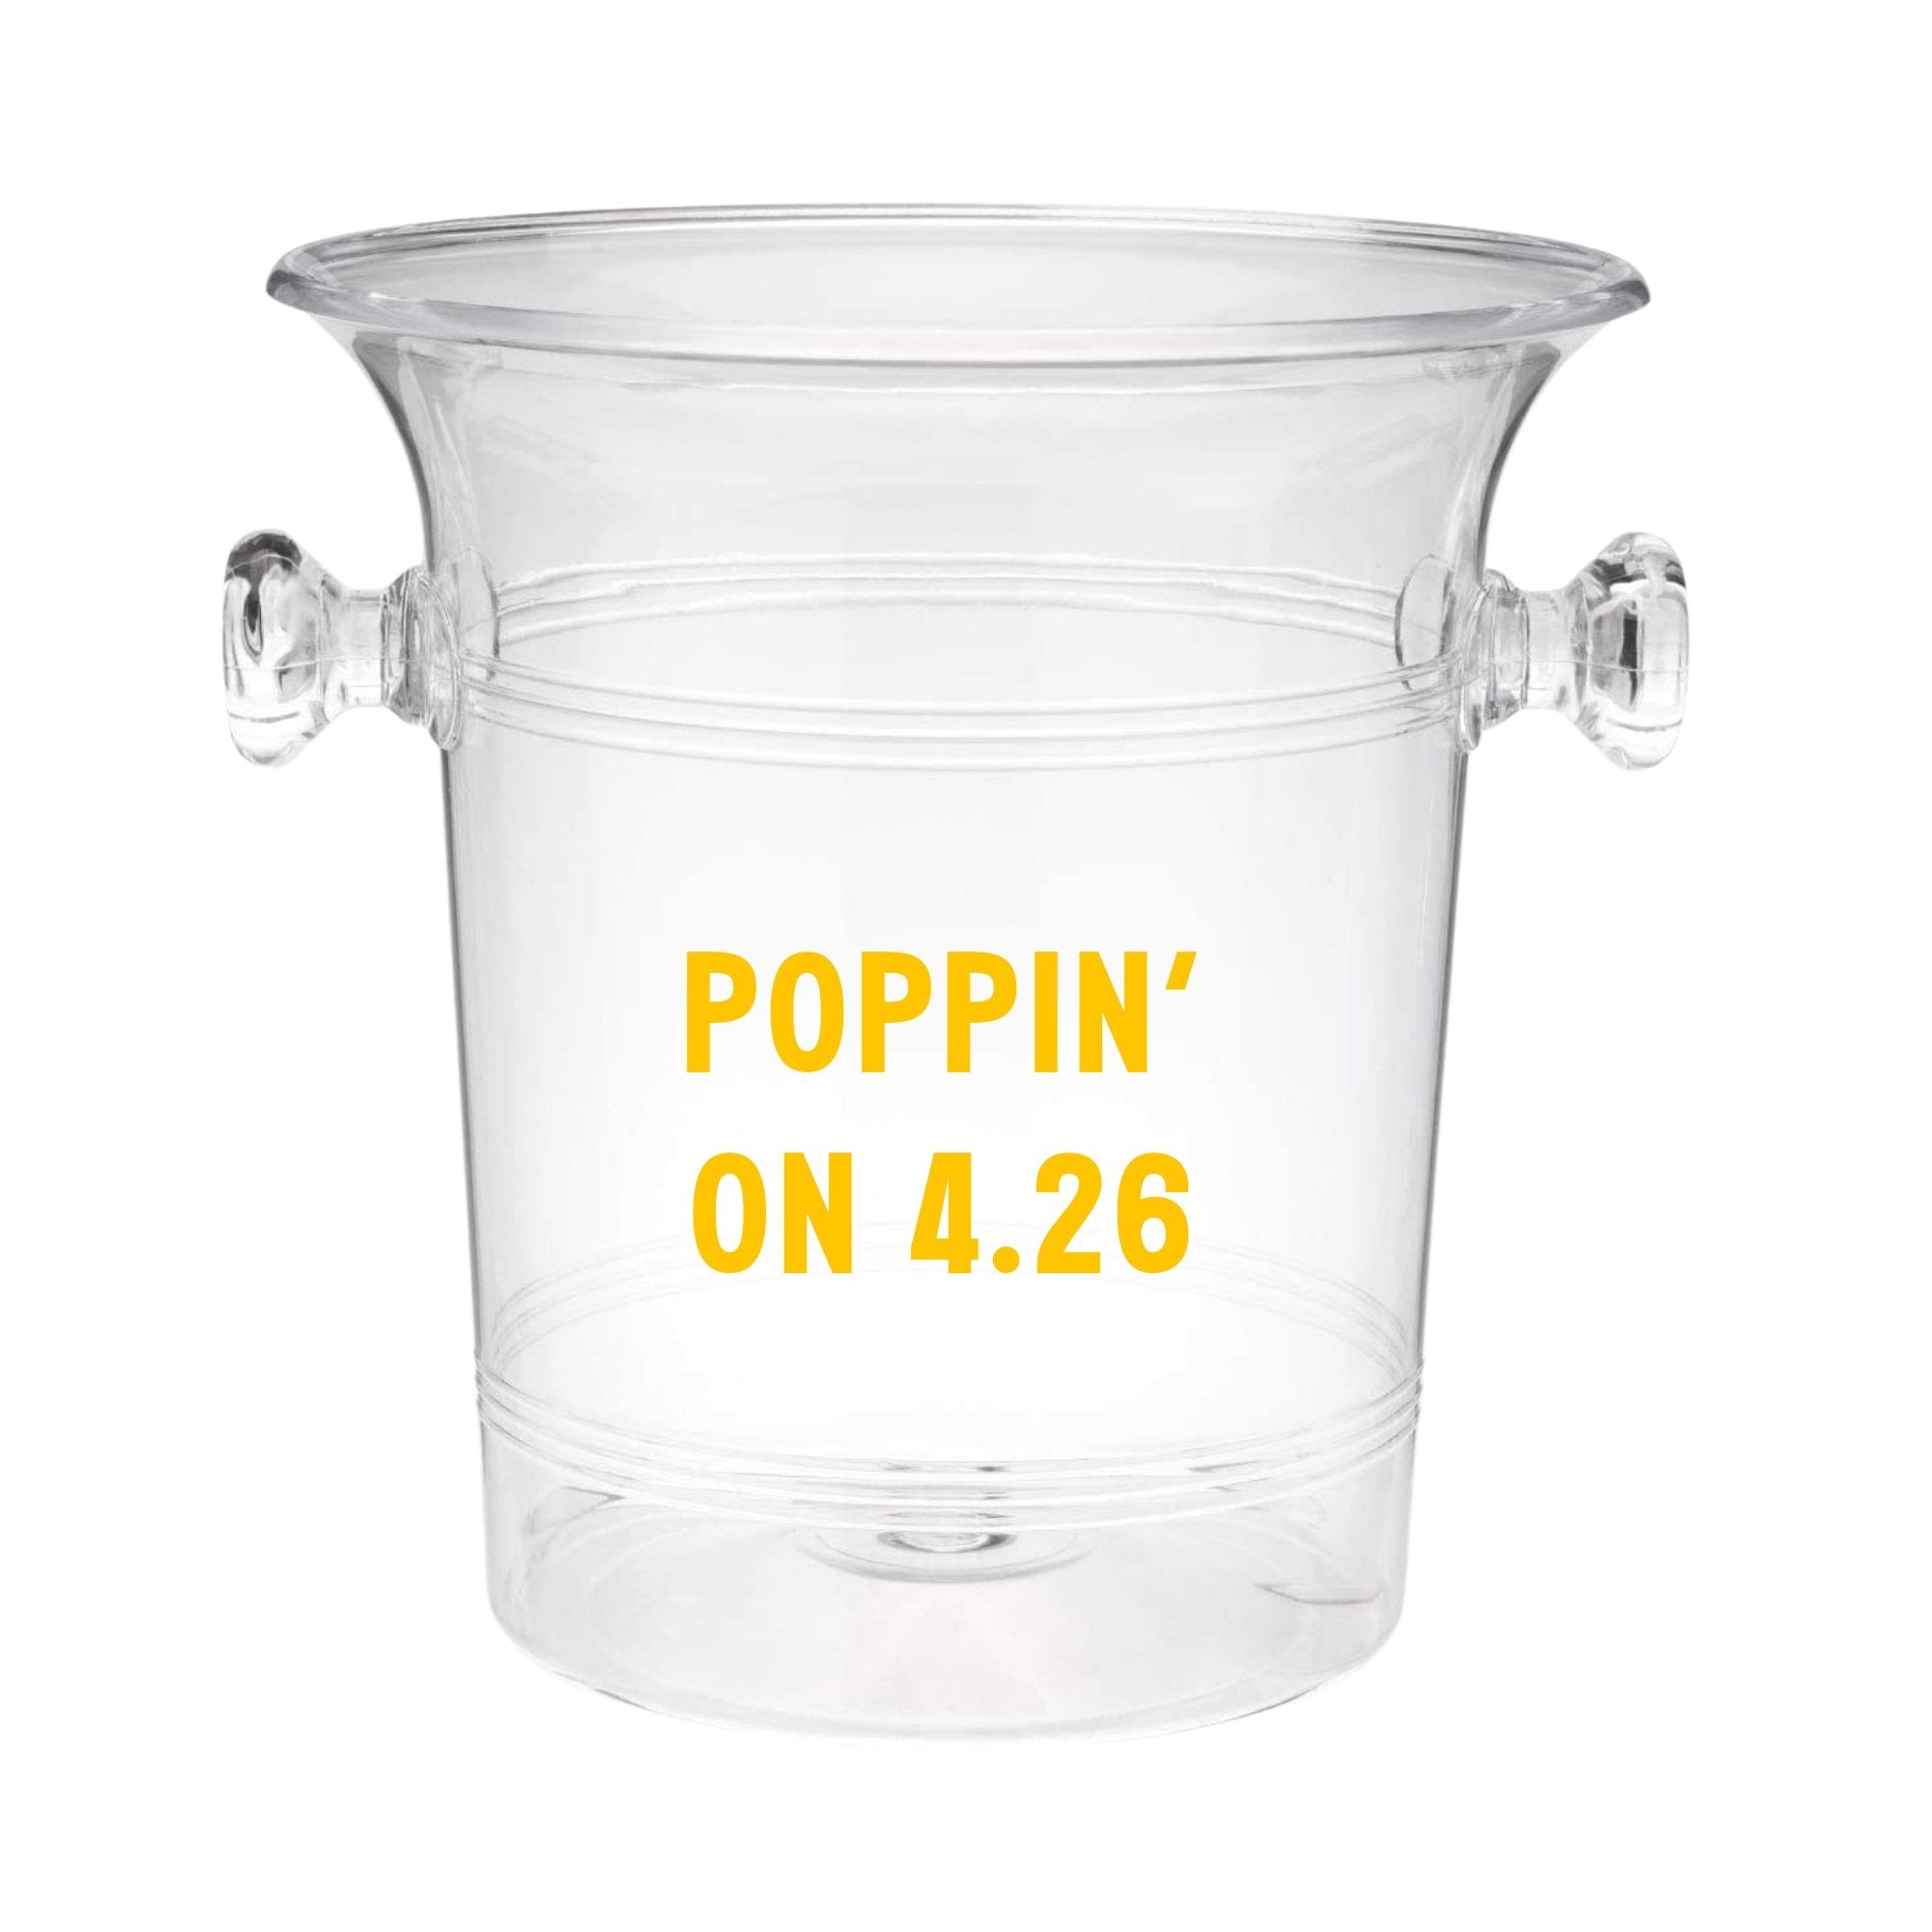 A clear ice bucket reads "Poppin' on 4.26" on the front